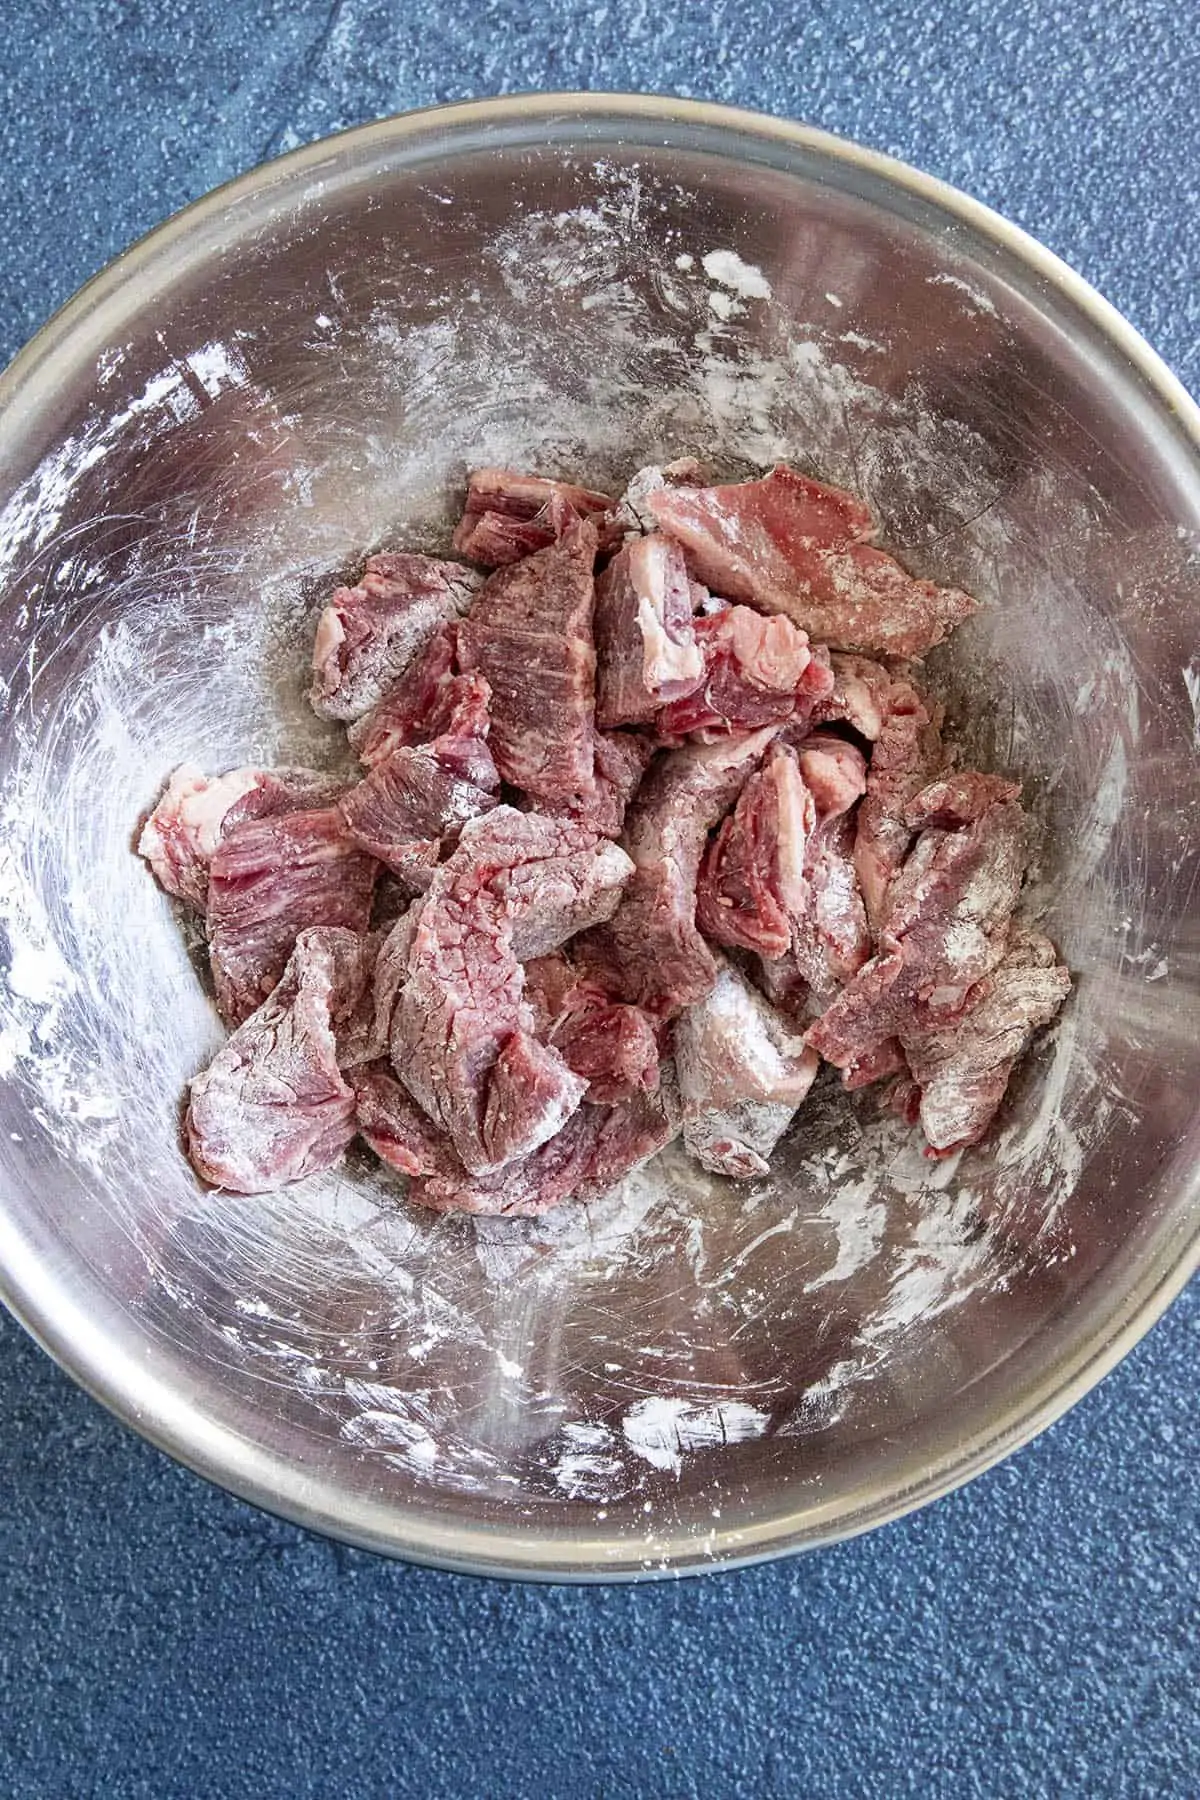 Coating strips of beef in corn starch